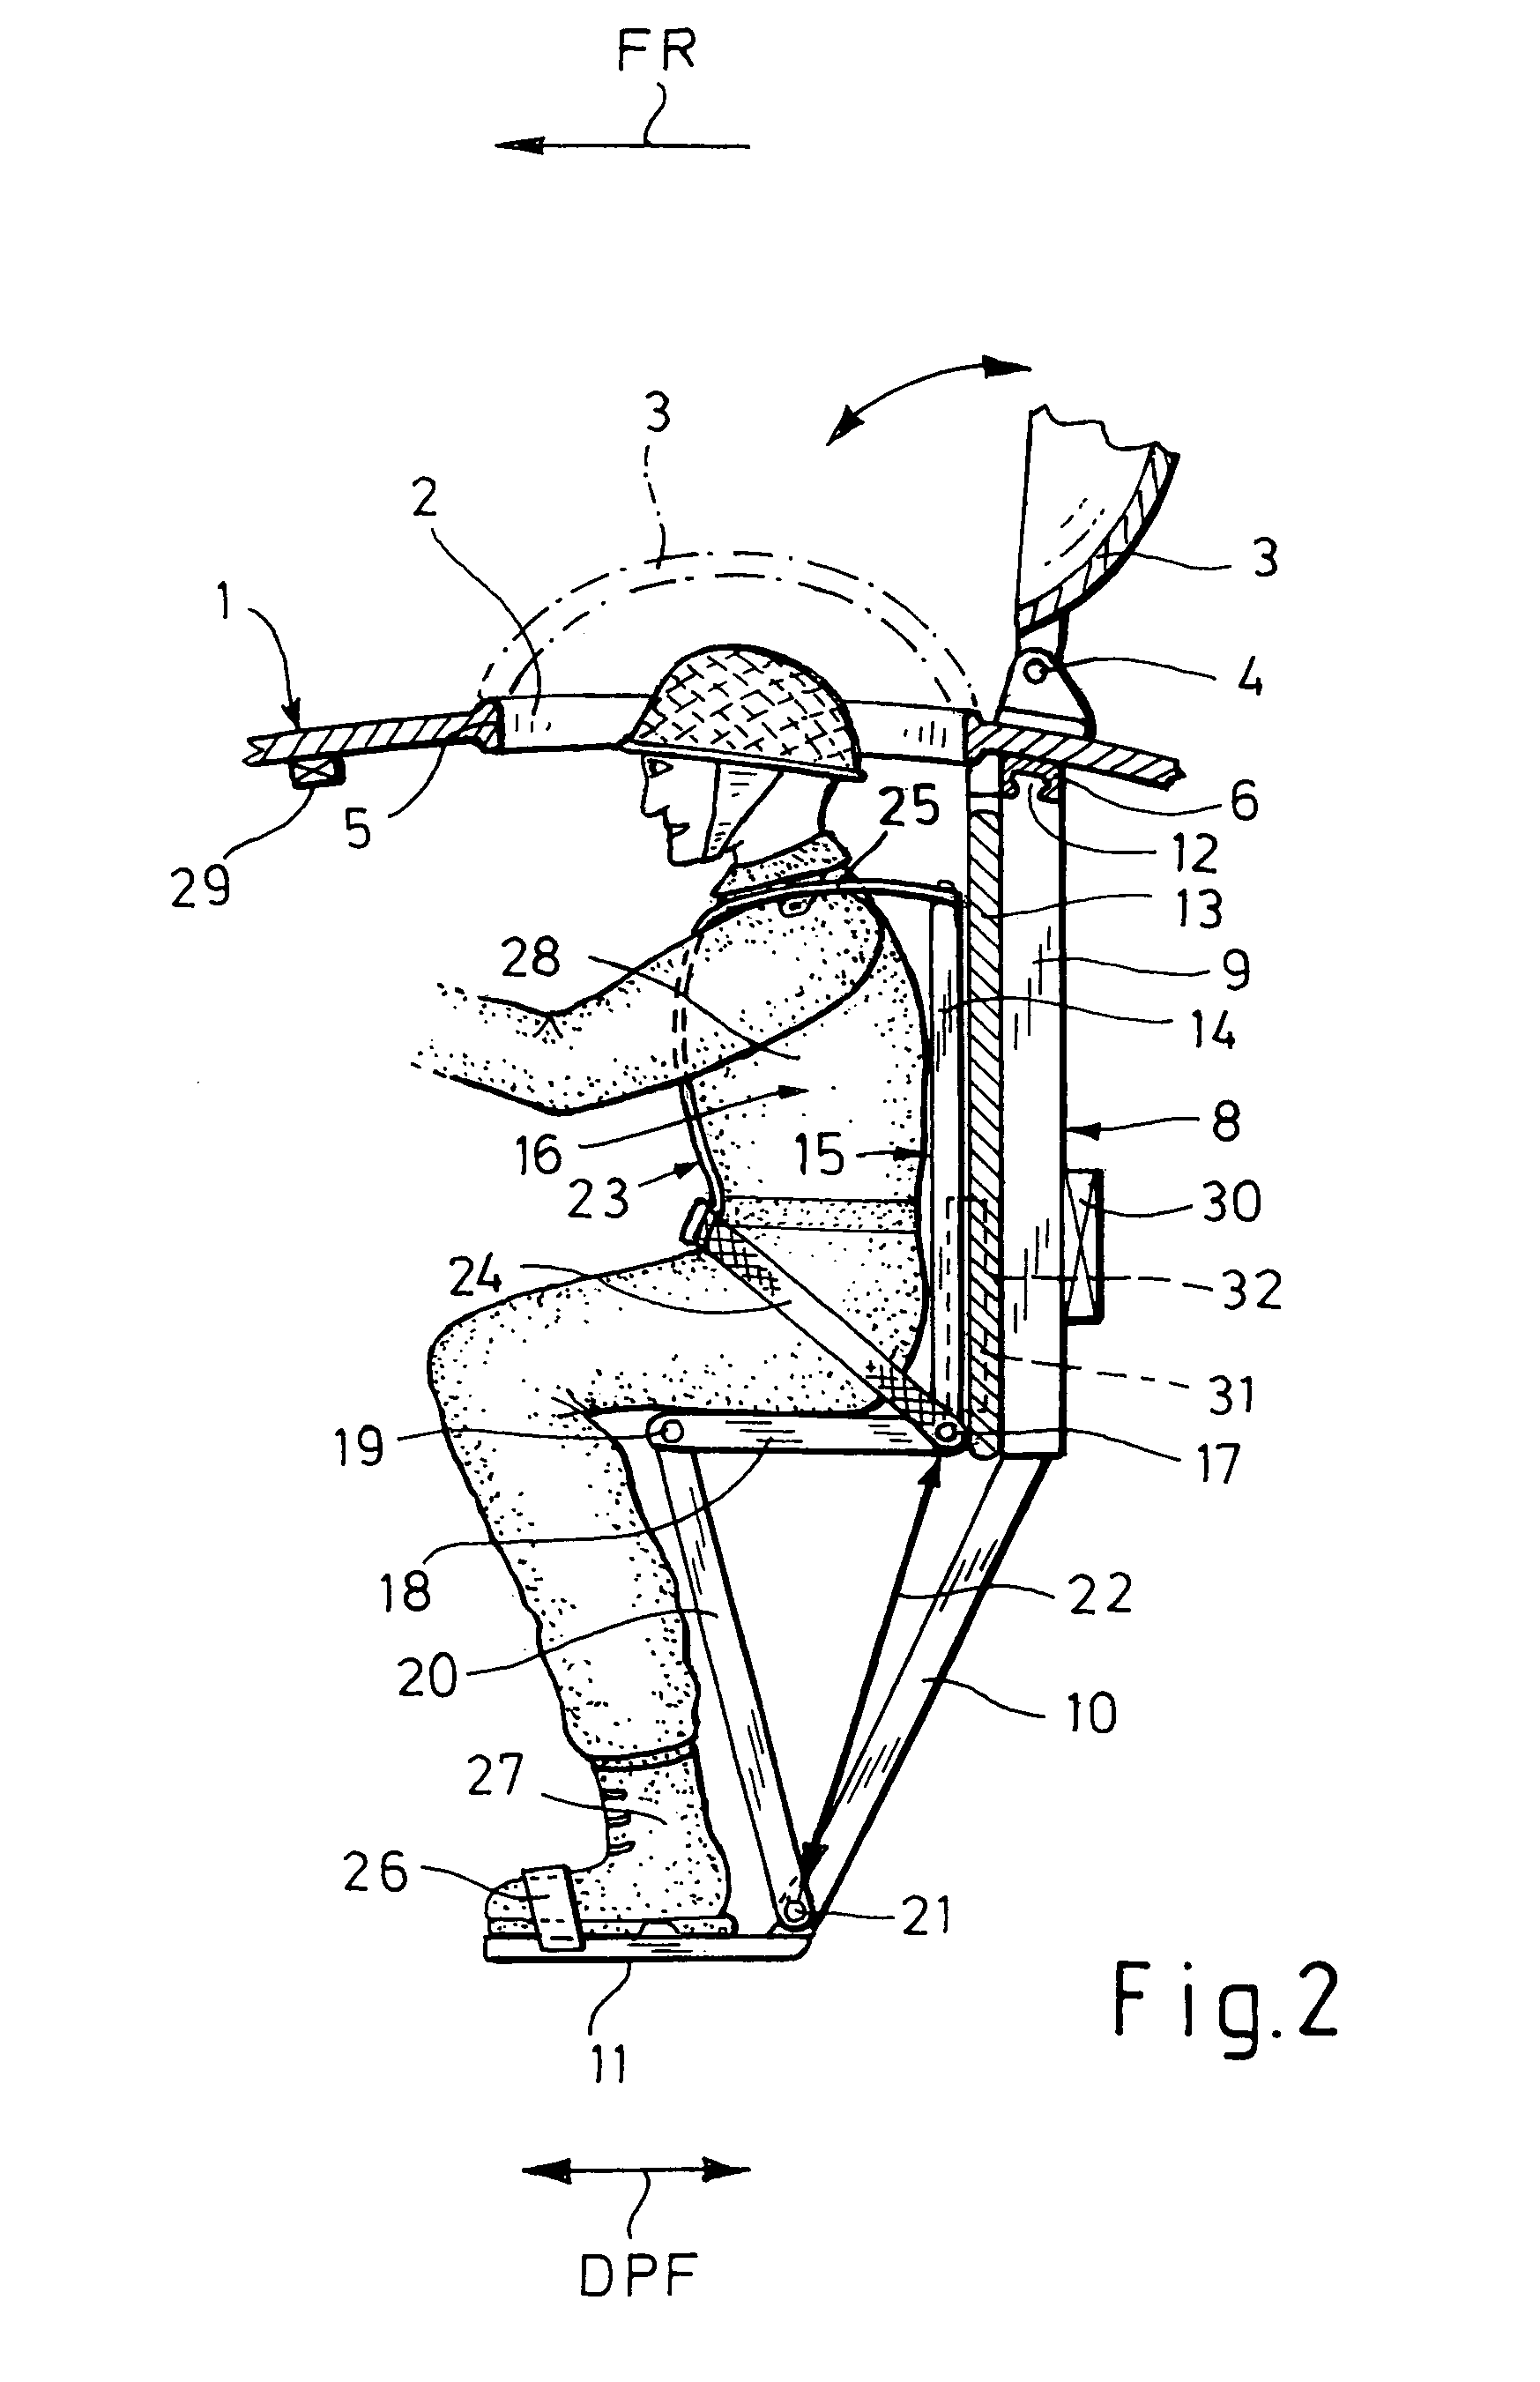 Apparatus for positioning an occupant of a vehicle